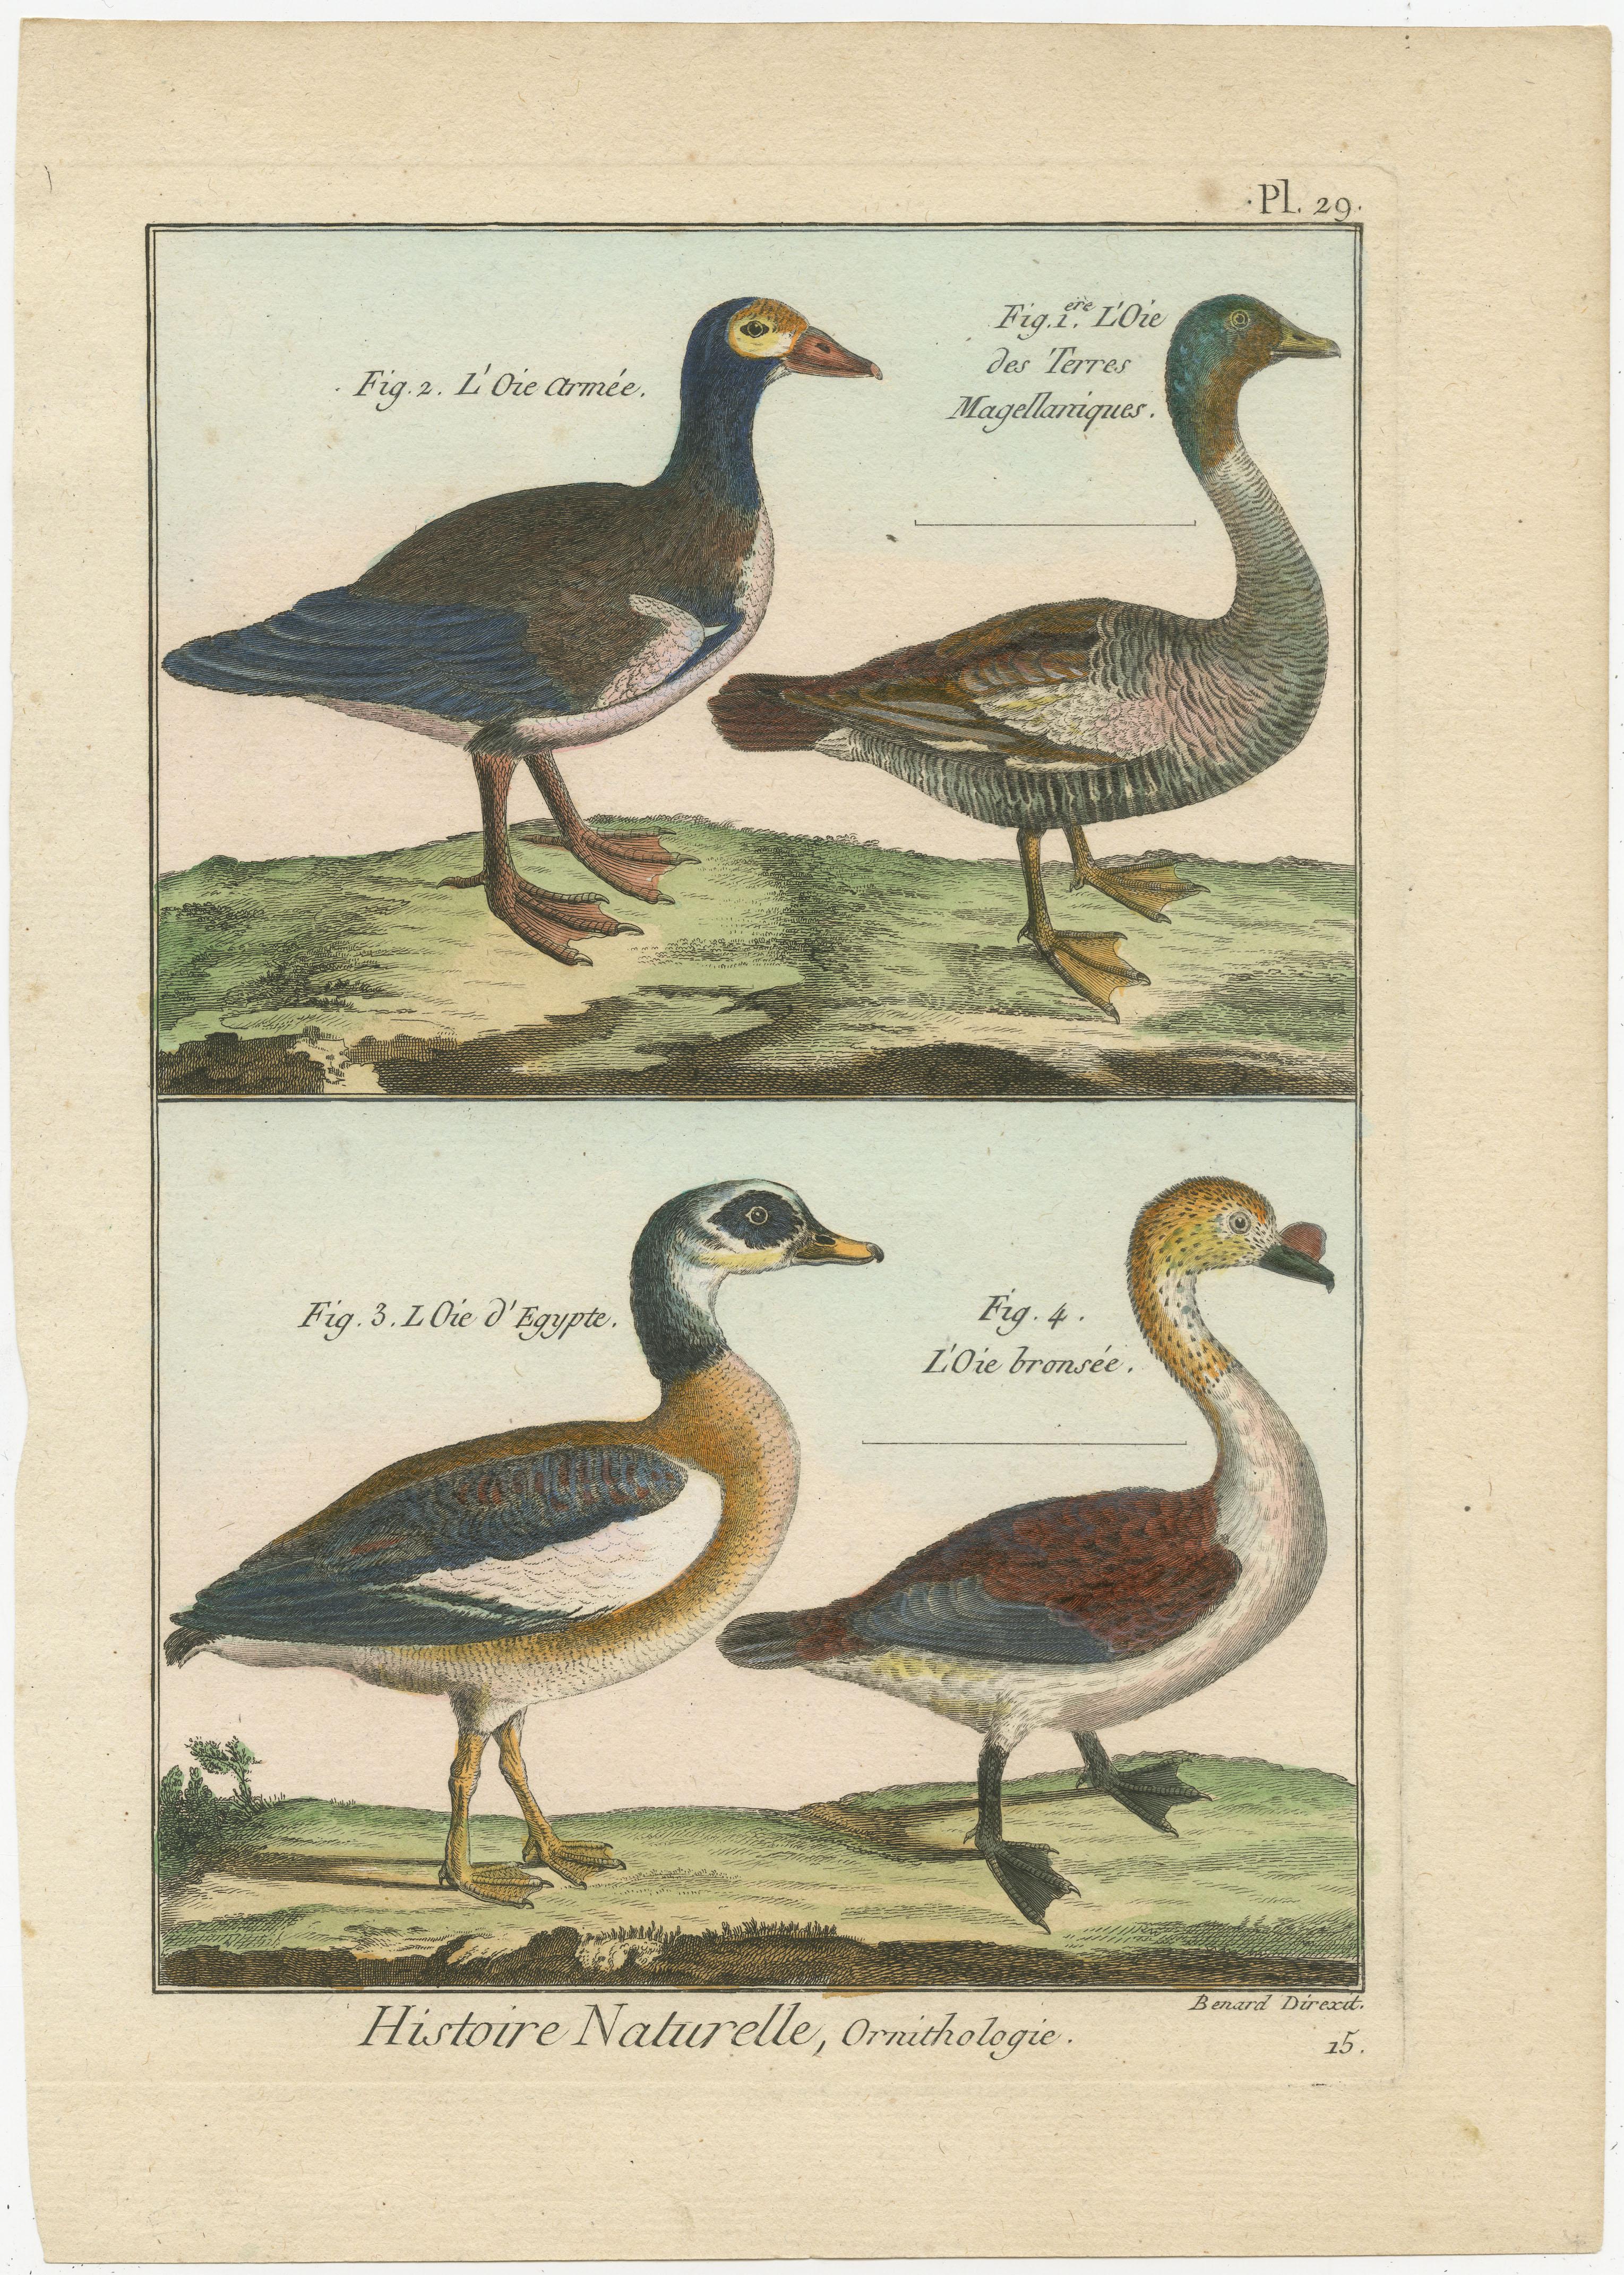 An authentic, perfect and bright, originally hand-colored, illustration of 4 Geese on parchment paper (copper engraving). It has a fine shining because of the authenticly applied egg-yolk as varnish. The Artist is Robert Bernard (1792). The